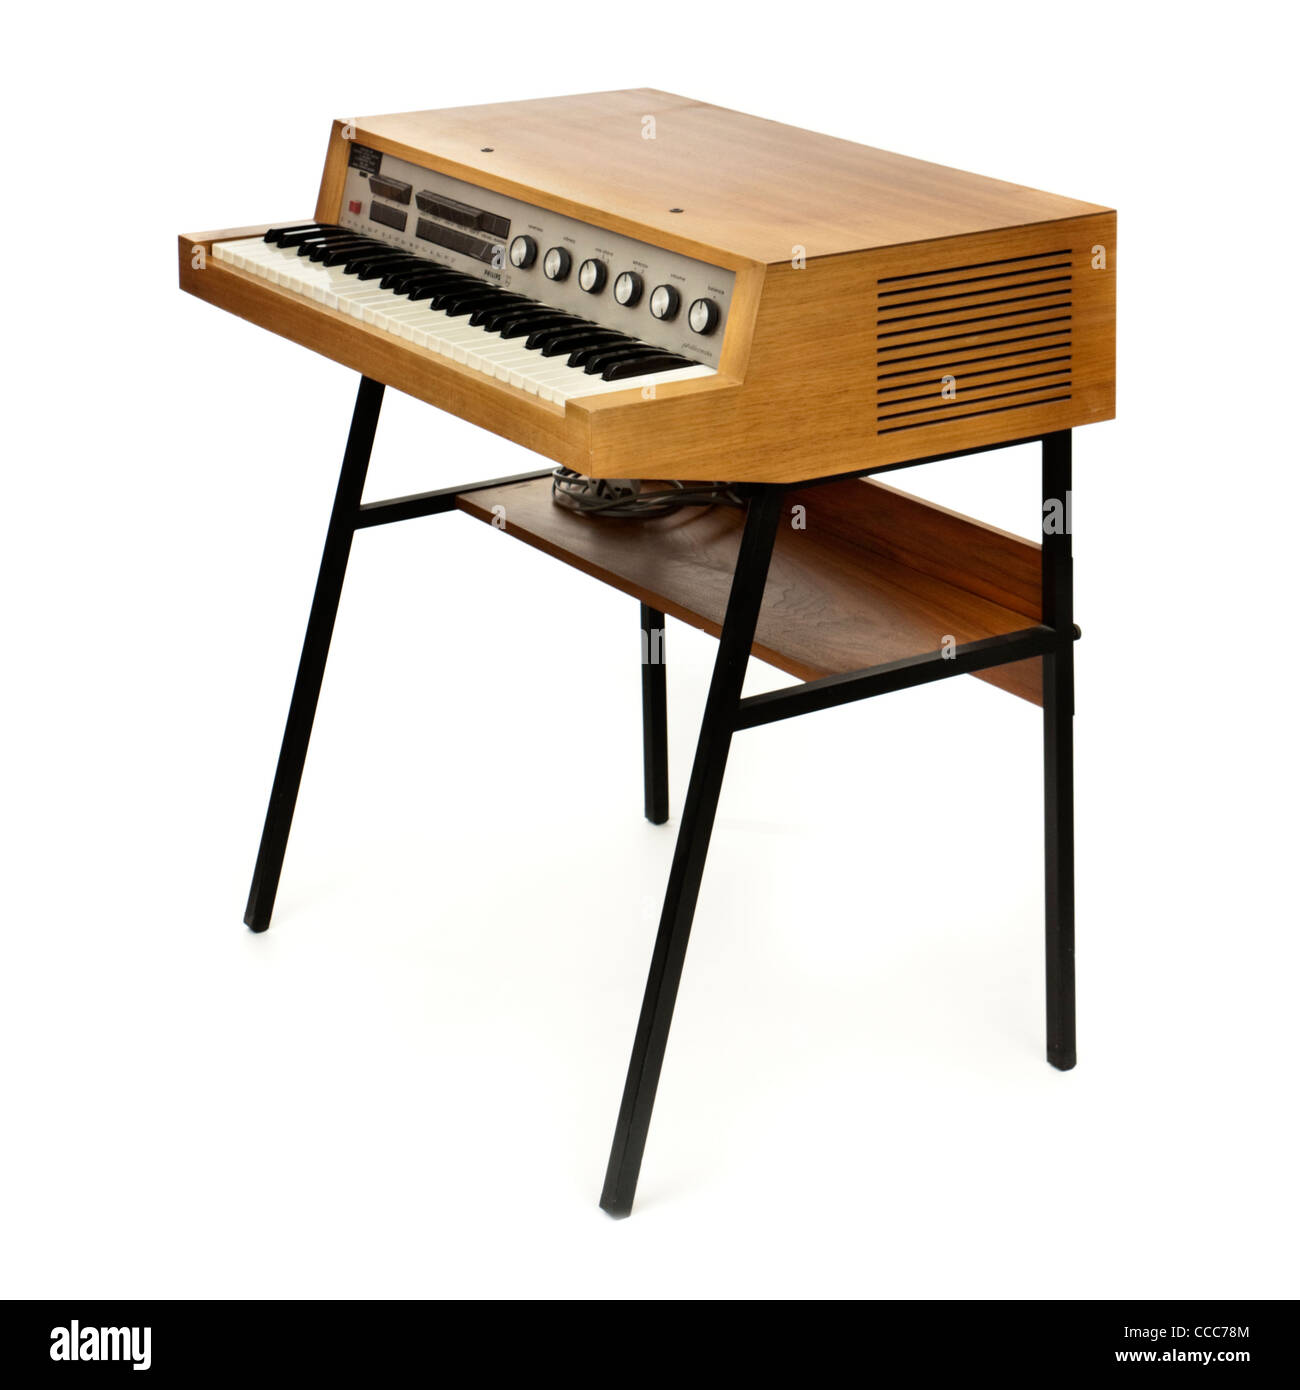 Rare vintage 1960's Philips "Philicorda" GM751 electronic organ, made in  Holland Stock Photo - Alamy